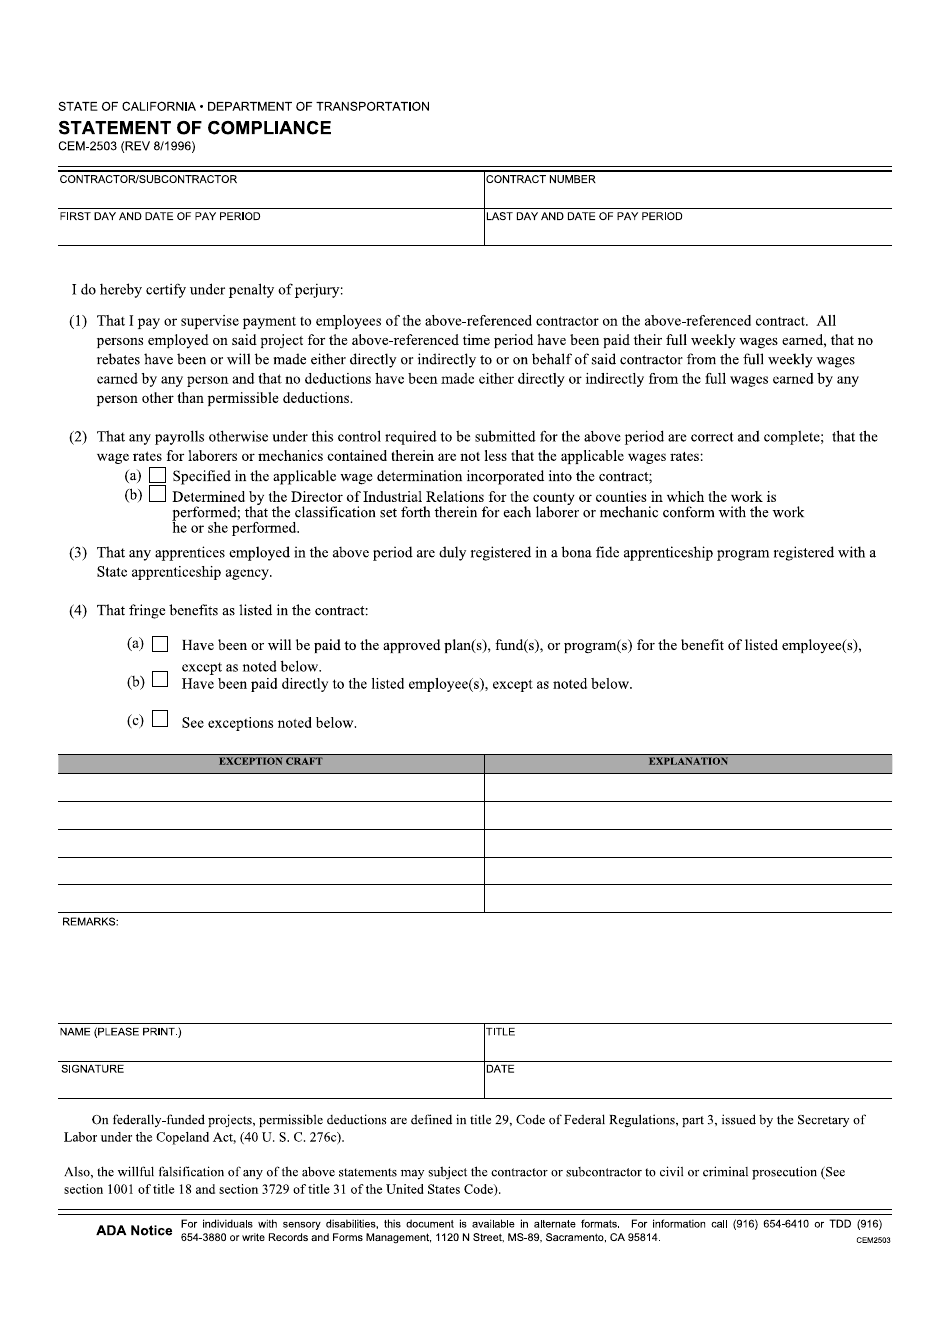 Form CEM-2503 Statement of Compliance - California, Page 1